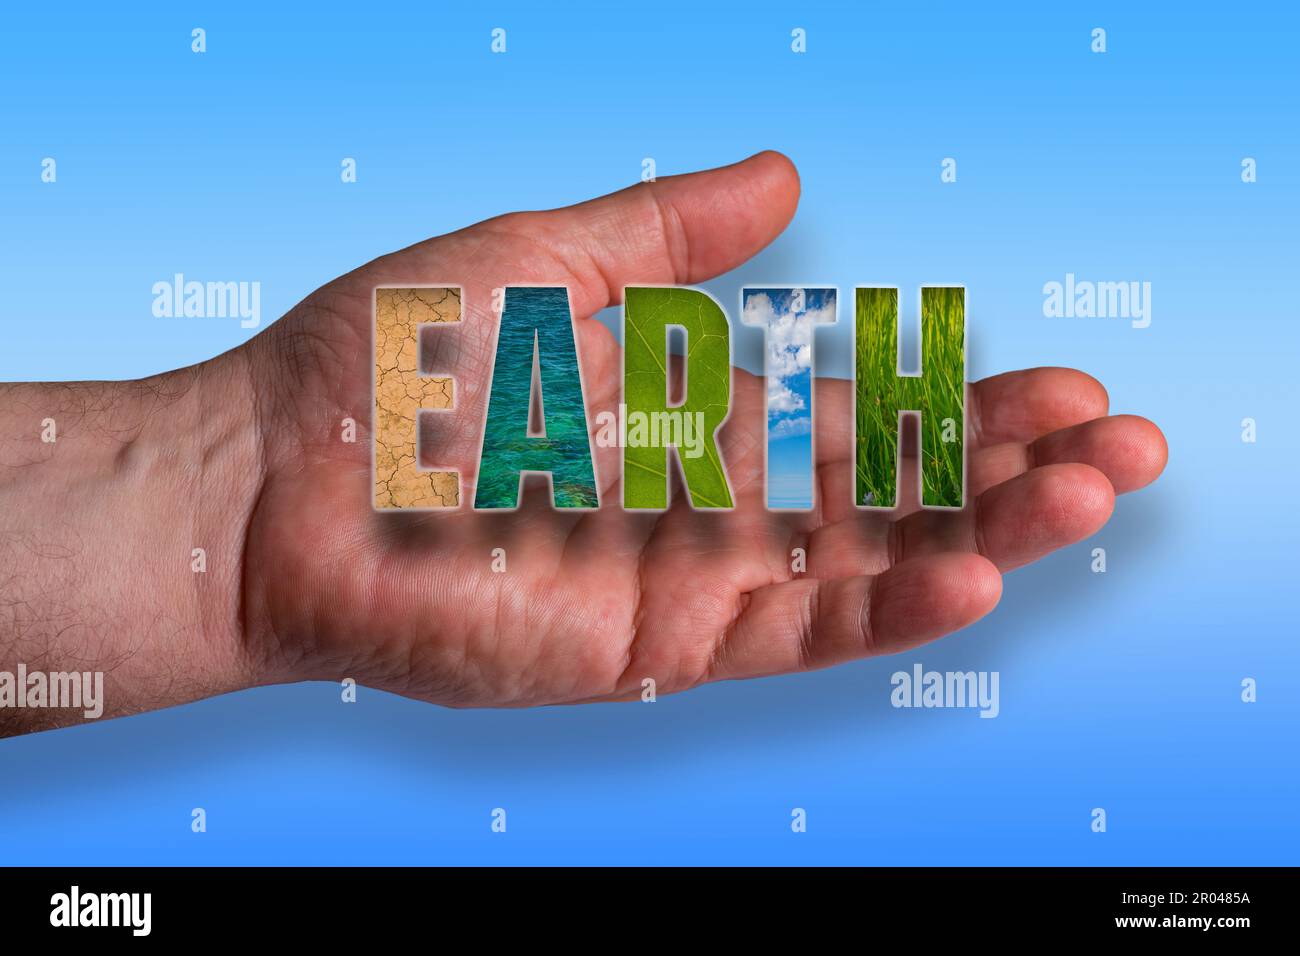 Open male hand, word Earth filled with images of desert, sea, leaf texture, sky with clouds and grass. Light blue gradient background Stock Photo